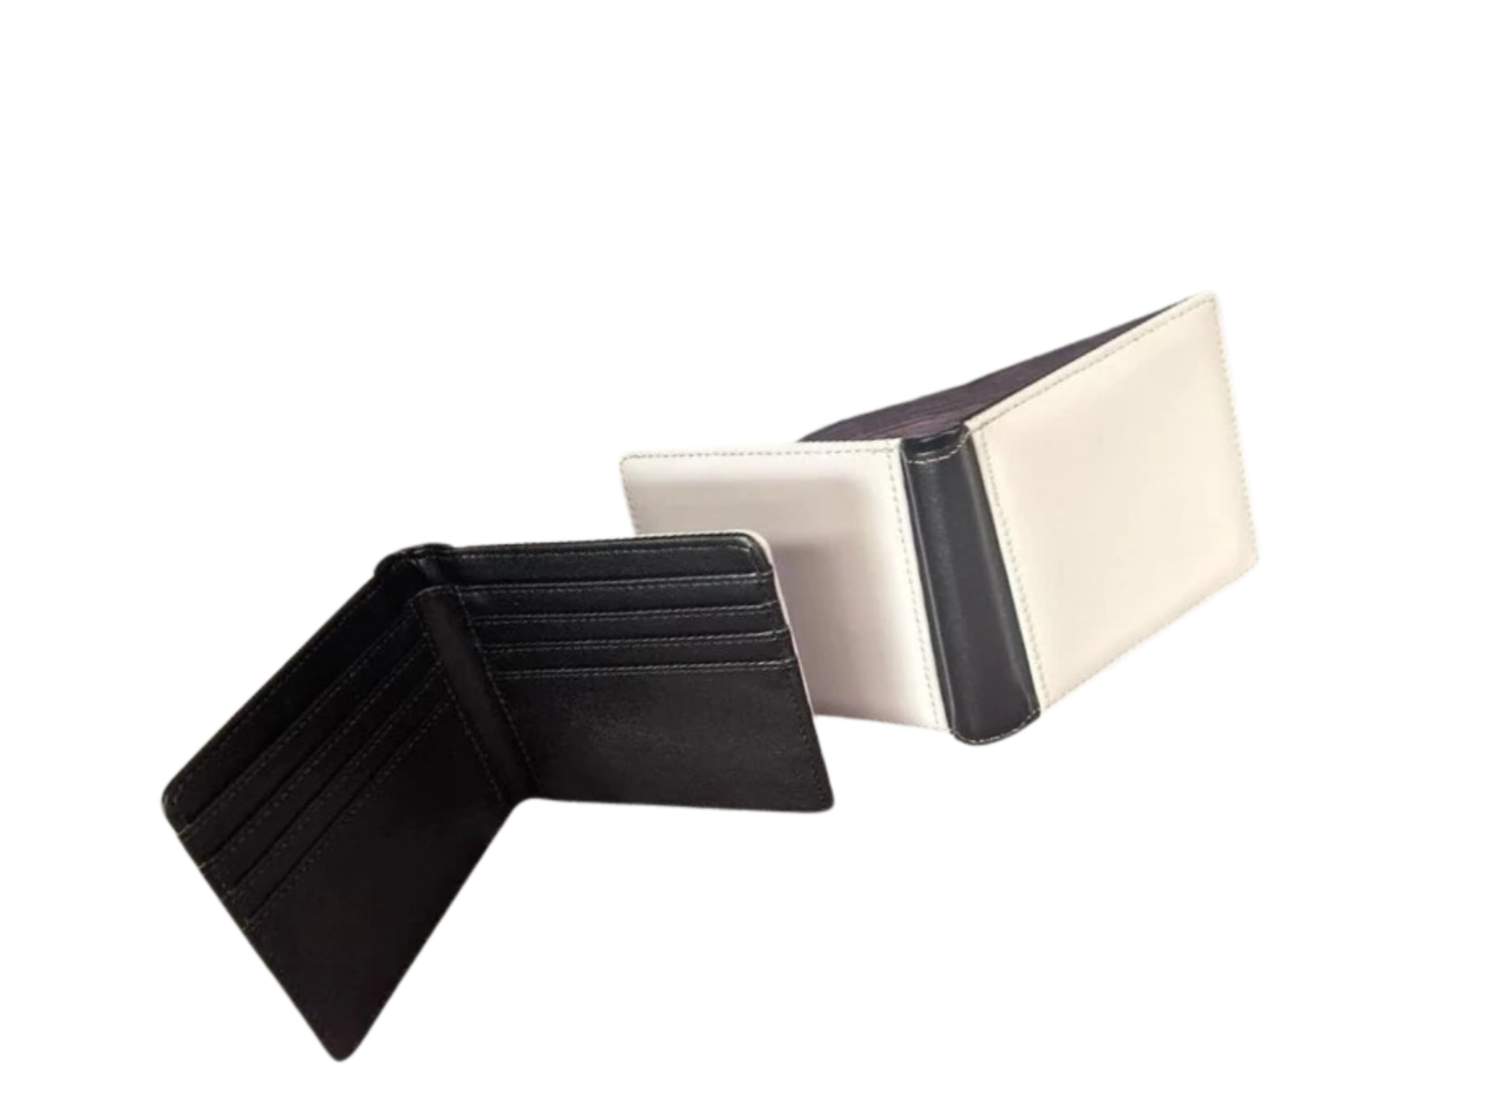 Wallet, Men's Double Sided Sublimation PU Leather Wallet